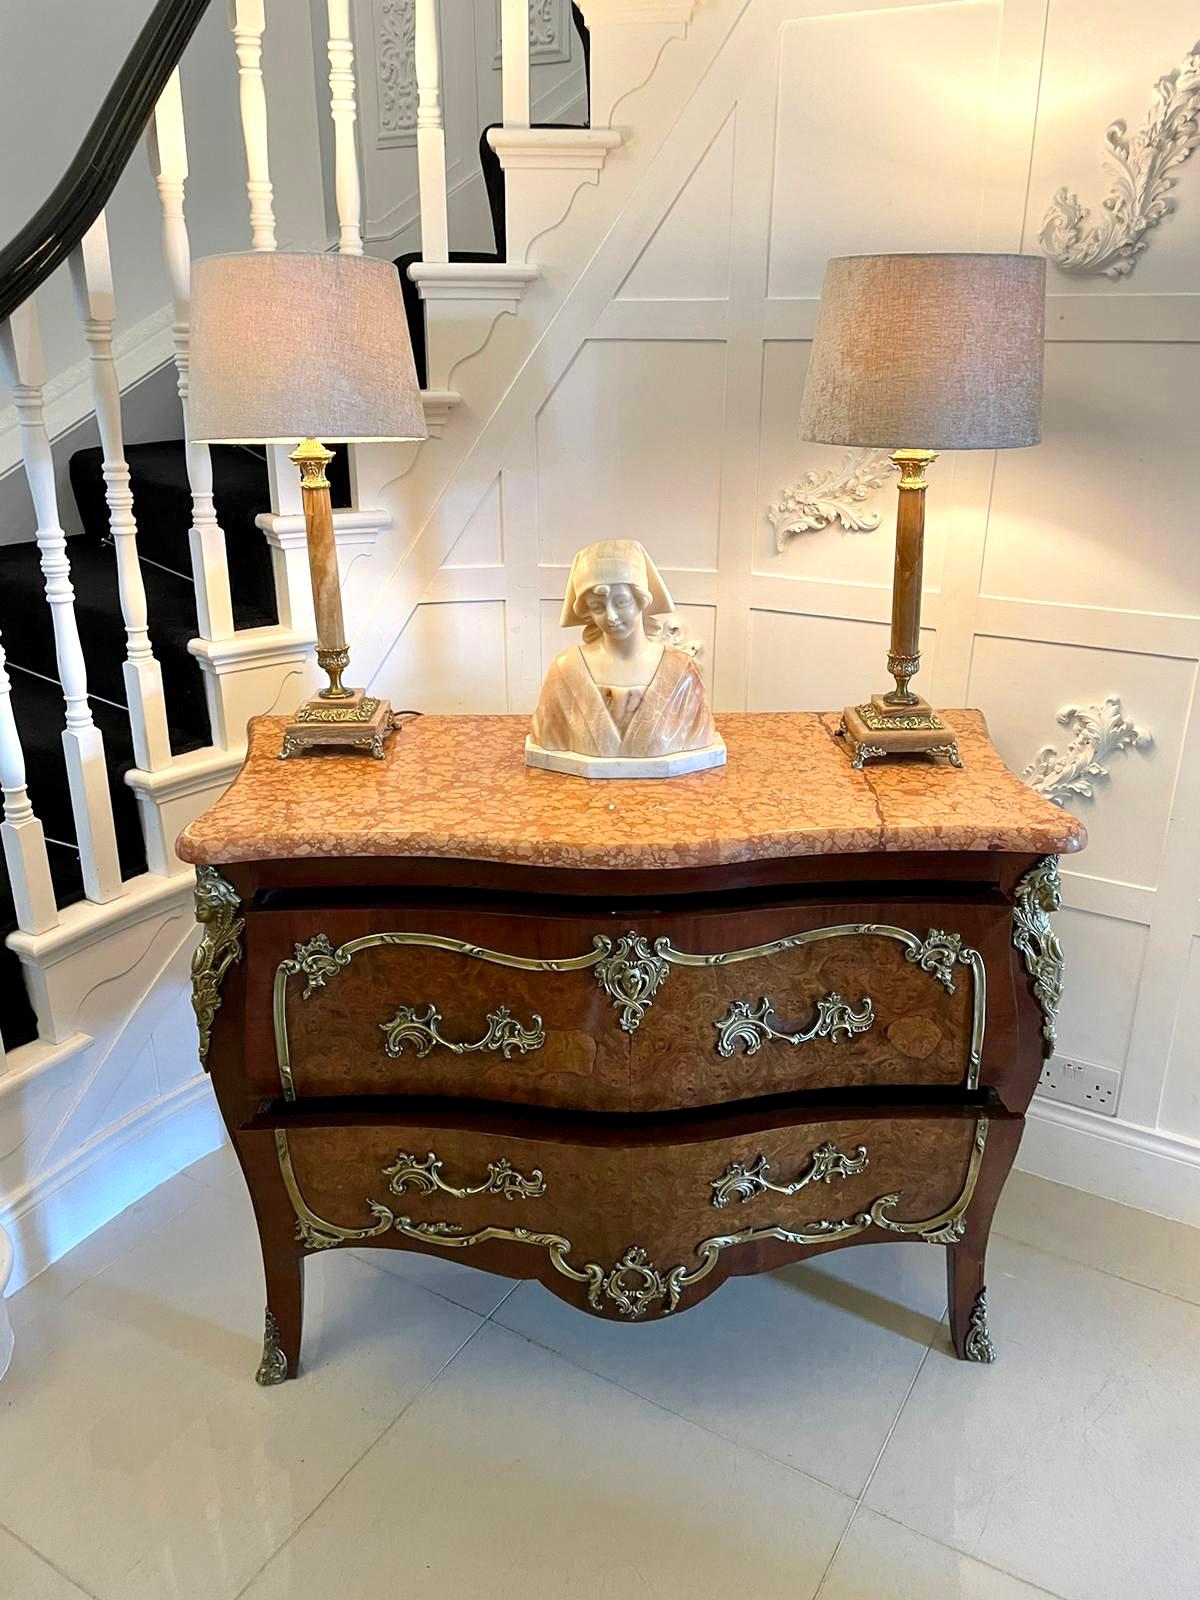 Antique Victorian French quality burr walnut marble top ormolu mounted commode/chest of drawers having a serpentine shaped coloured marble top above two long bombe shaped burr walnut drawers with ornate ormolu mounts and handles, burr walnut bombe